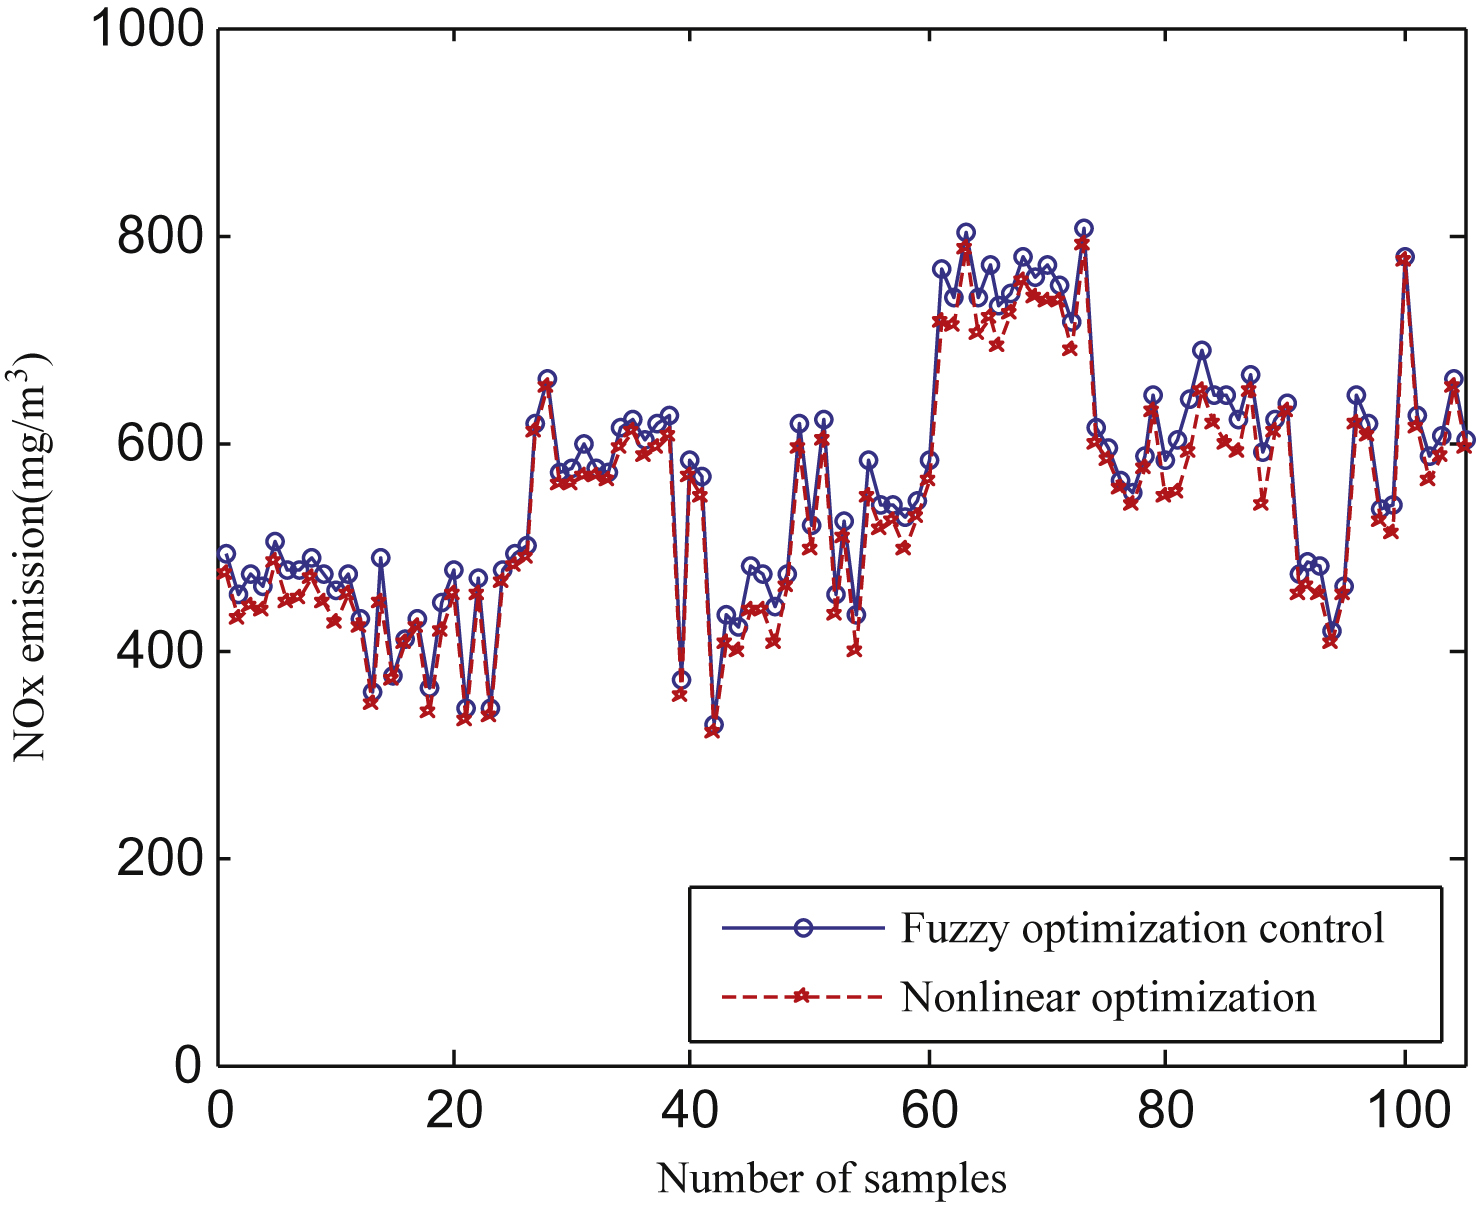 Corresponding NOx emissions obtained by the fuzzy and nonlinear optimization methods.